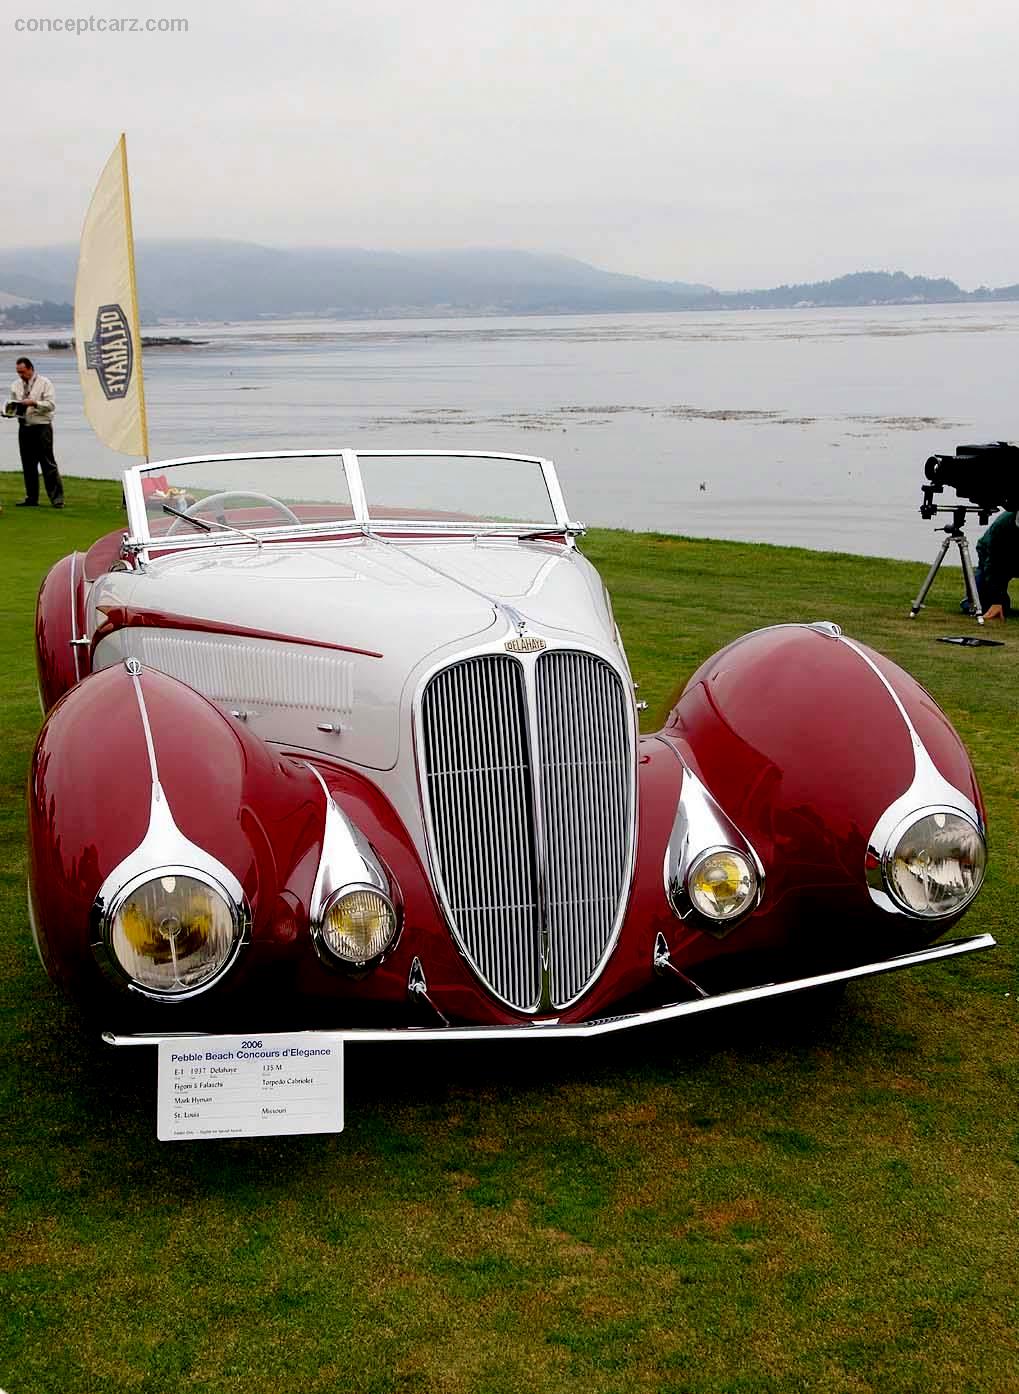 Delahaye Cabrio Photo Gallery: Photo #10 out of 12, Image Size ...